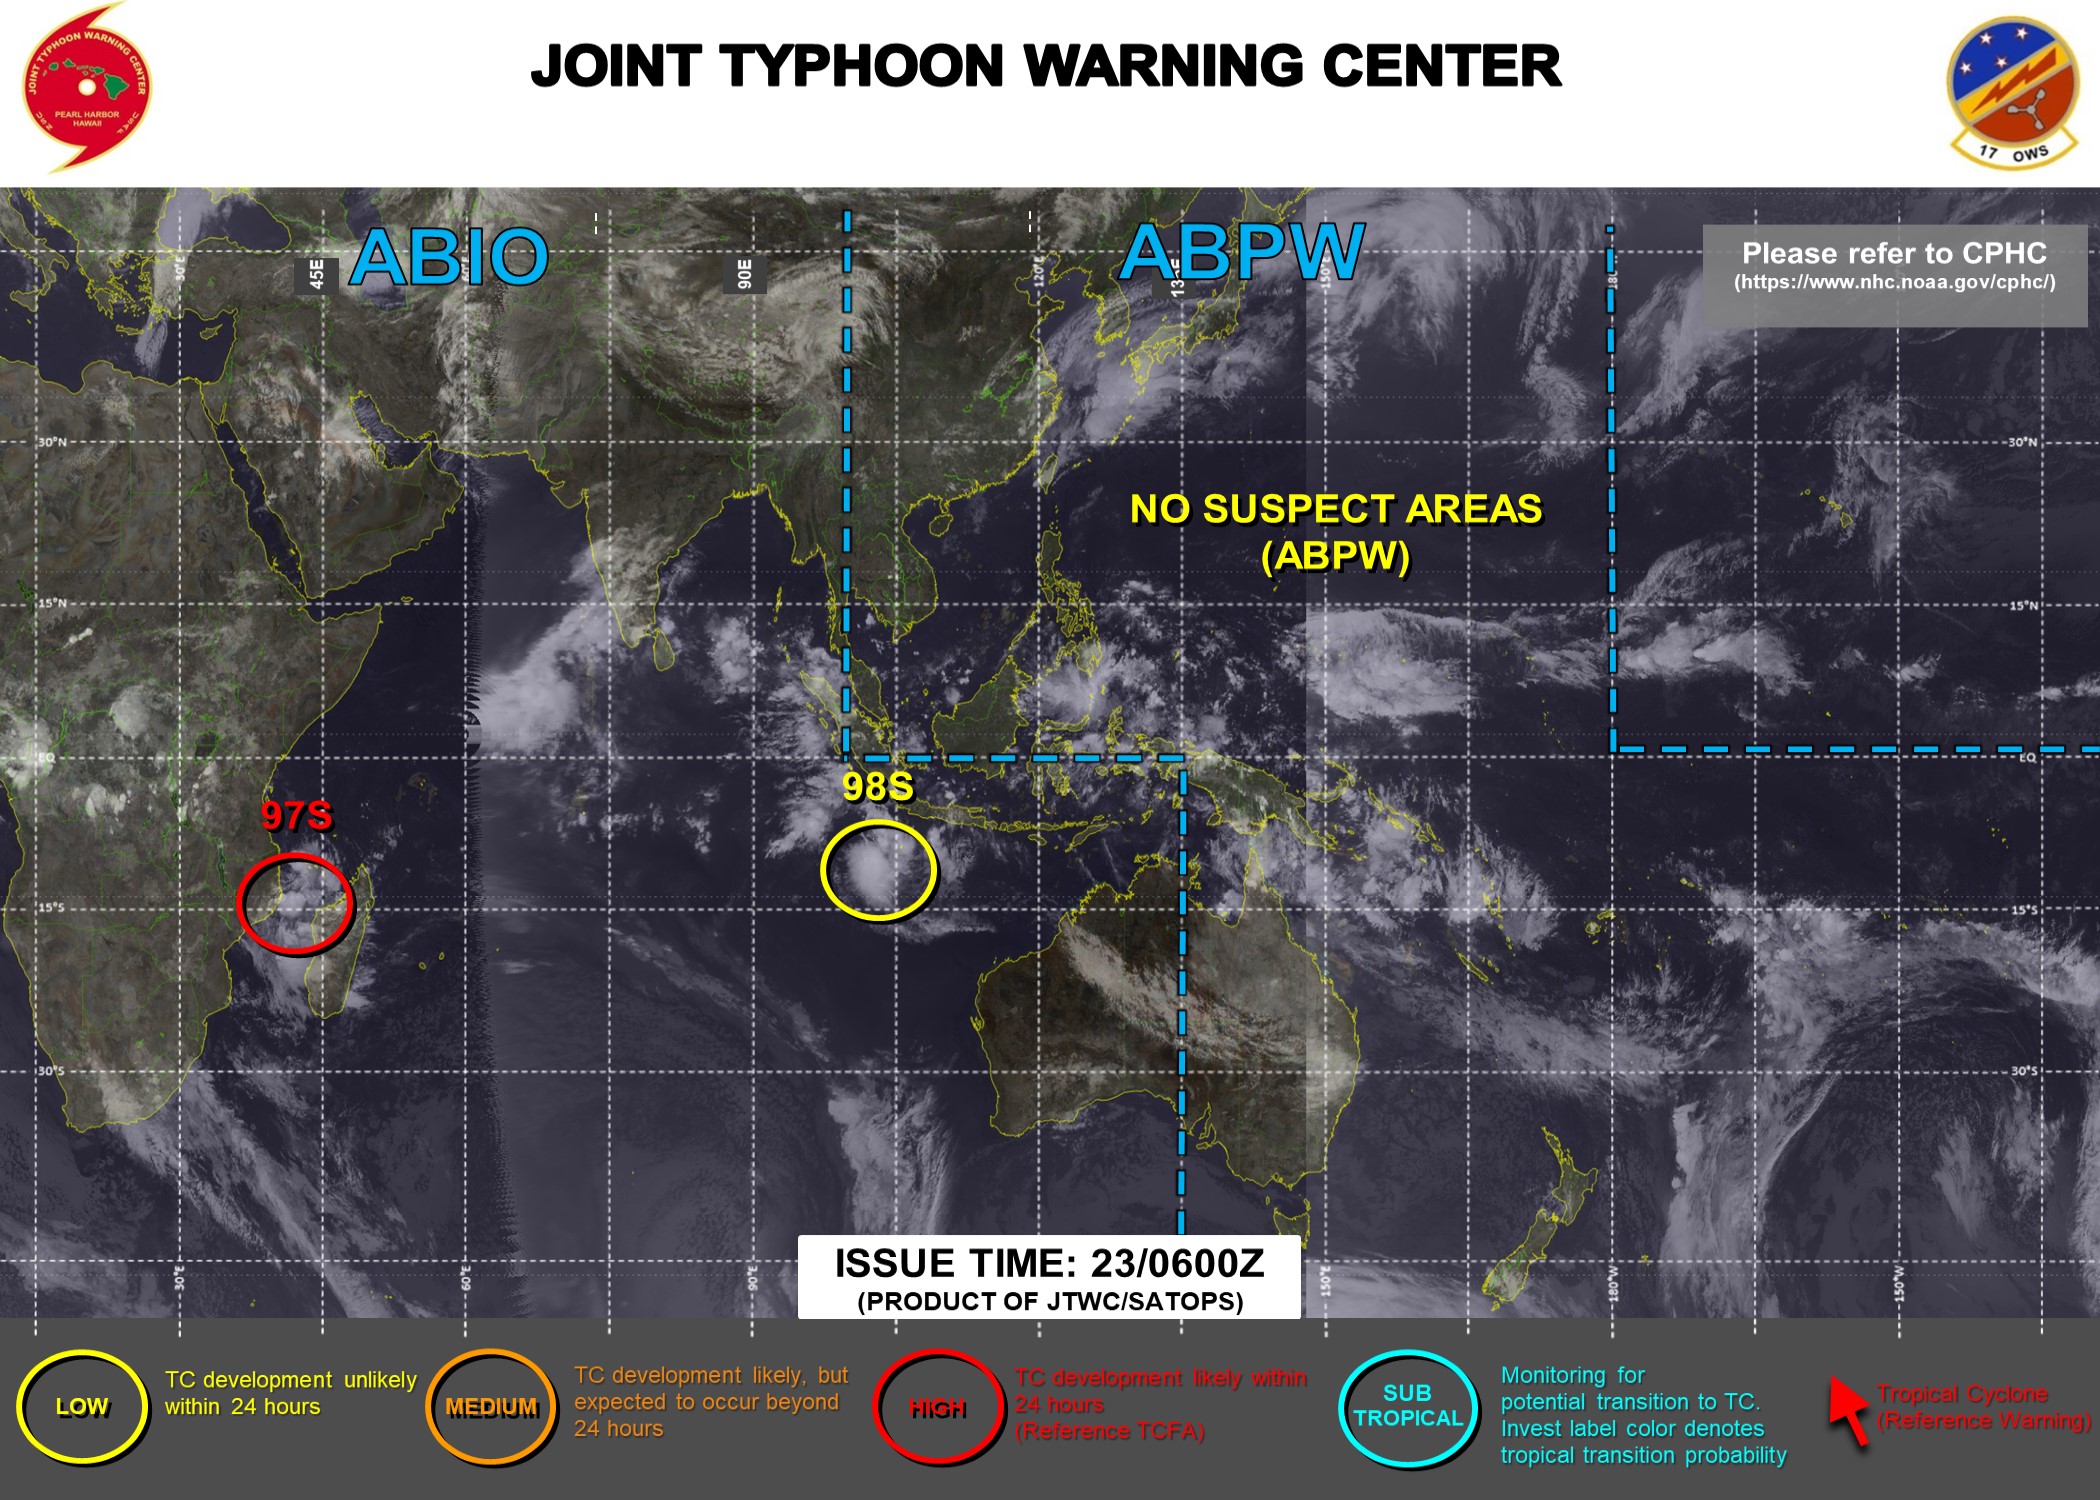 JTWC IS ISSUING 3HOURLY SATELLITE BULLETINS ON 97S AND 98S.